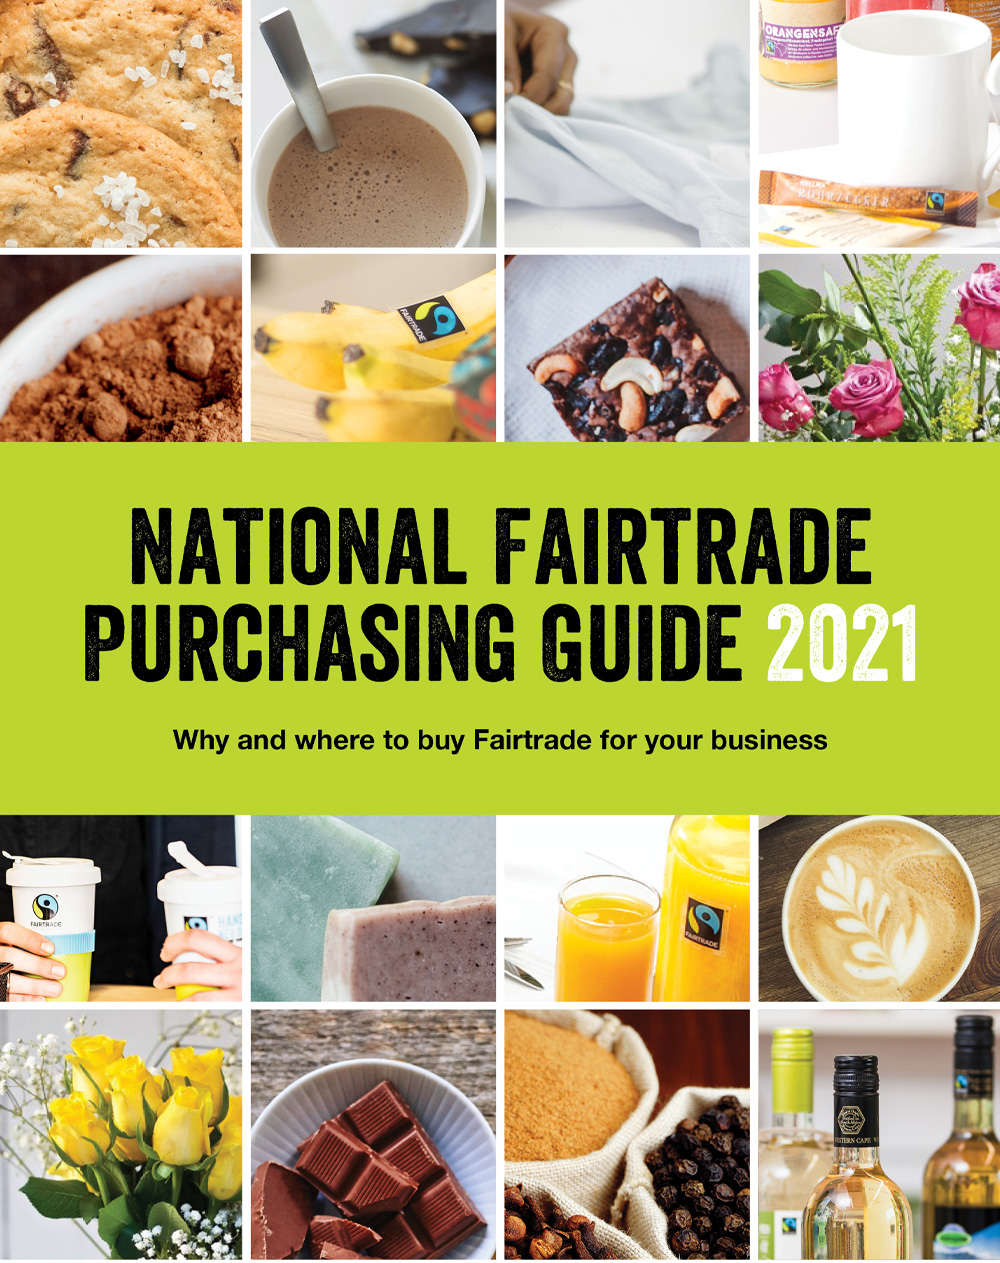 National Fairtrade Purchasing Guide